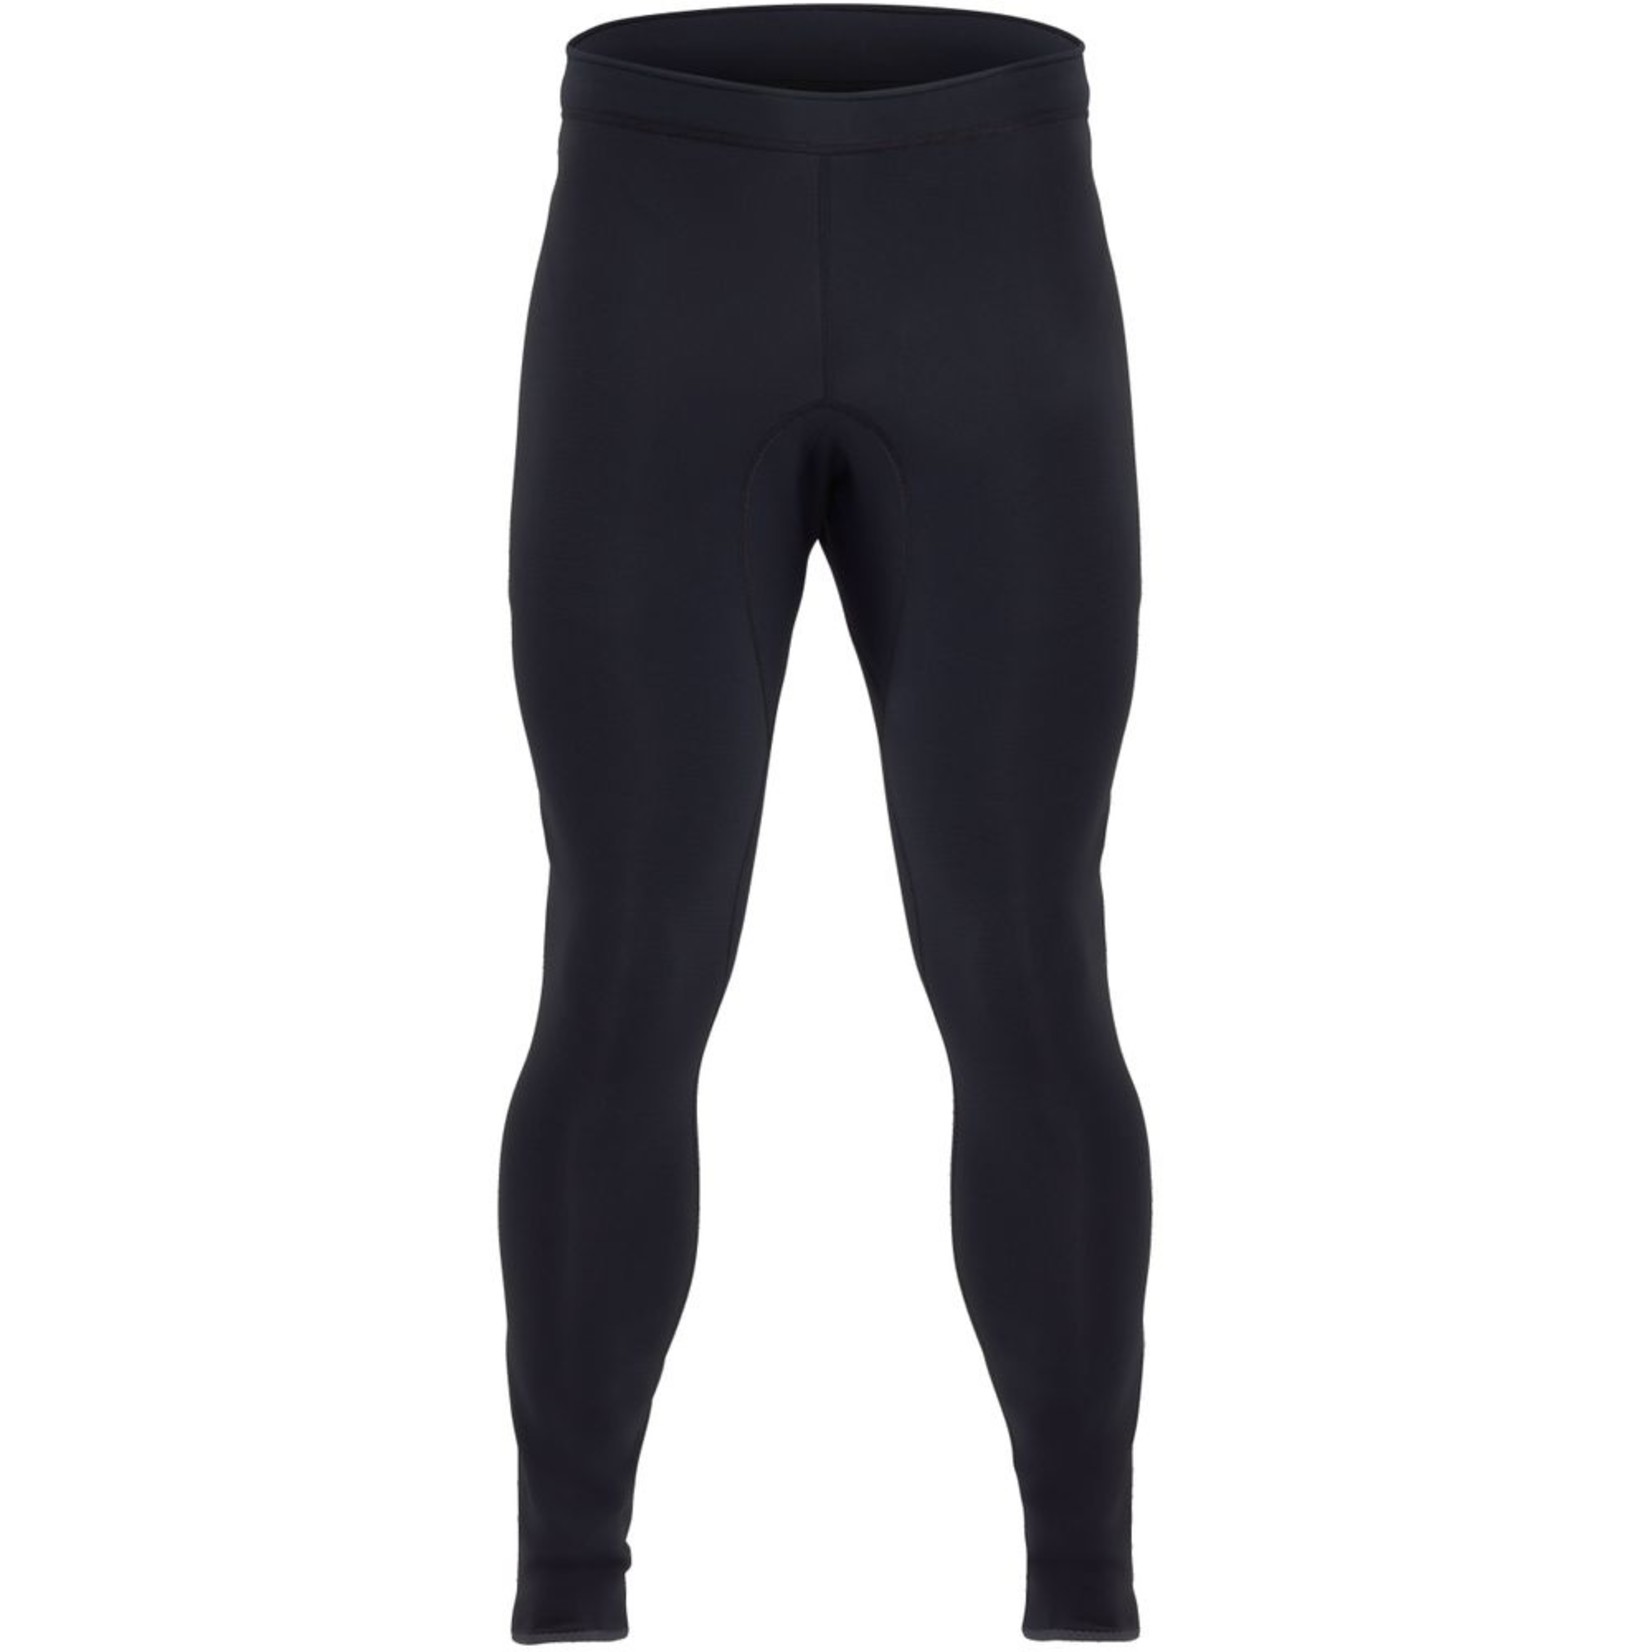 NRS NRS Men's HydroSkin 1.5 Pant **Closeout**